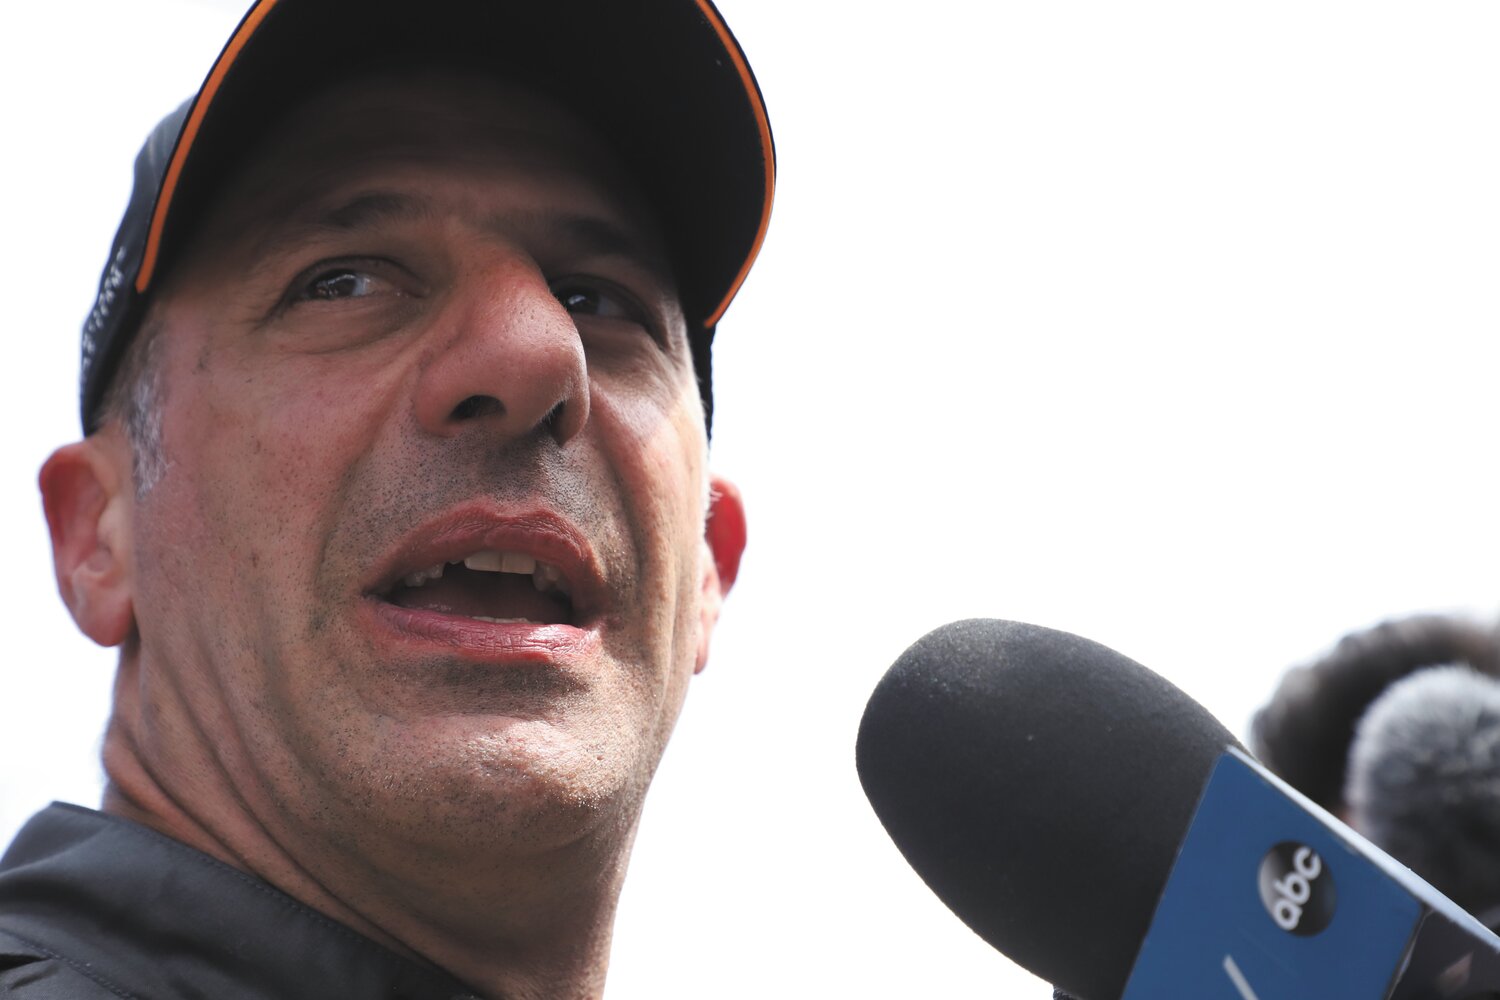 Photo Courtesy of Indianapolis Motor Speedway
IndyCar veteran Tony Kanaan raced in his final Indianapolis 500 career on 
Sunday. It was an emotional day for Kanaan who has been a fixture in professional motor sports for nearly three decades.